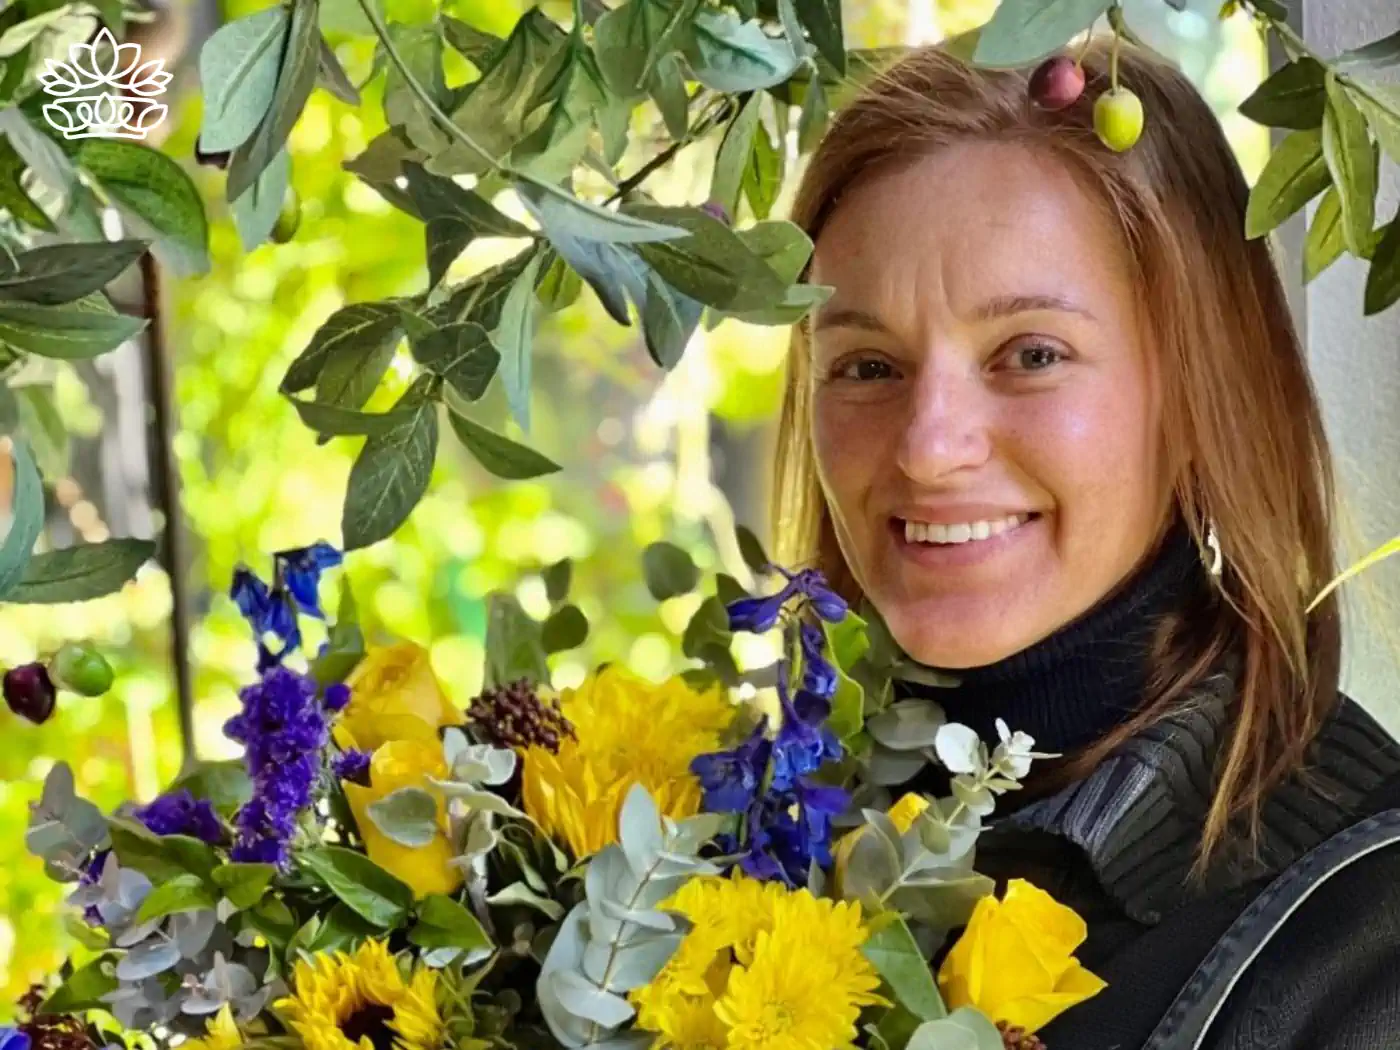 A smiling sa florist holding a vibrant bouquet featuring yellow sunflowers, blue delphiniums, and lush greenery, set against a backdrop of leafy branches. This image represents the New Flower Bouquets Collection, showcasing fresh and beautiful flower arrangements. The collection includes options for deliver flowers with same day delivery. Fabulous Flowers and Gifts.